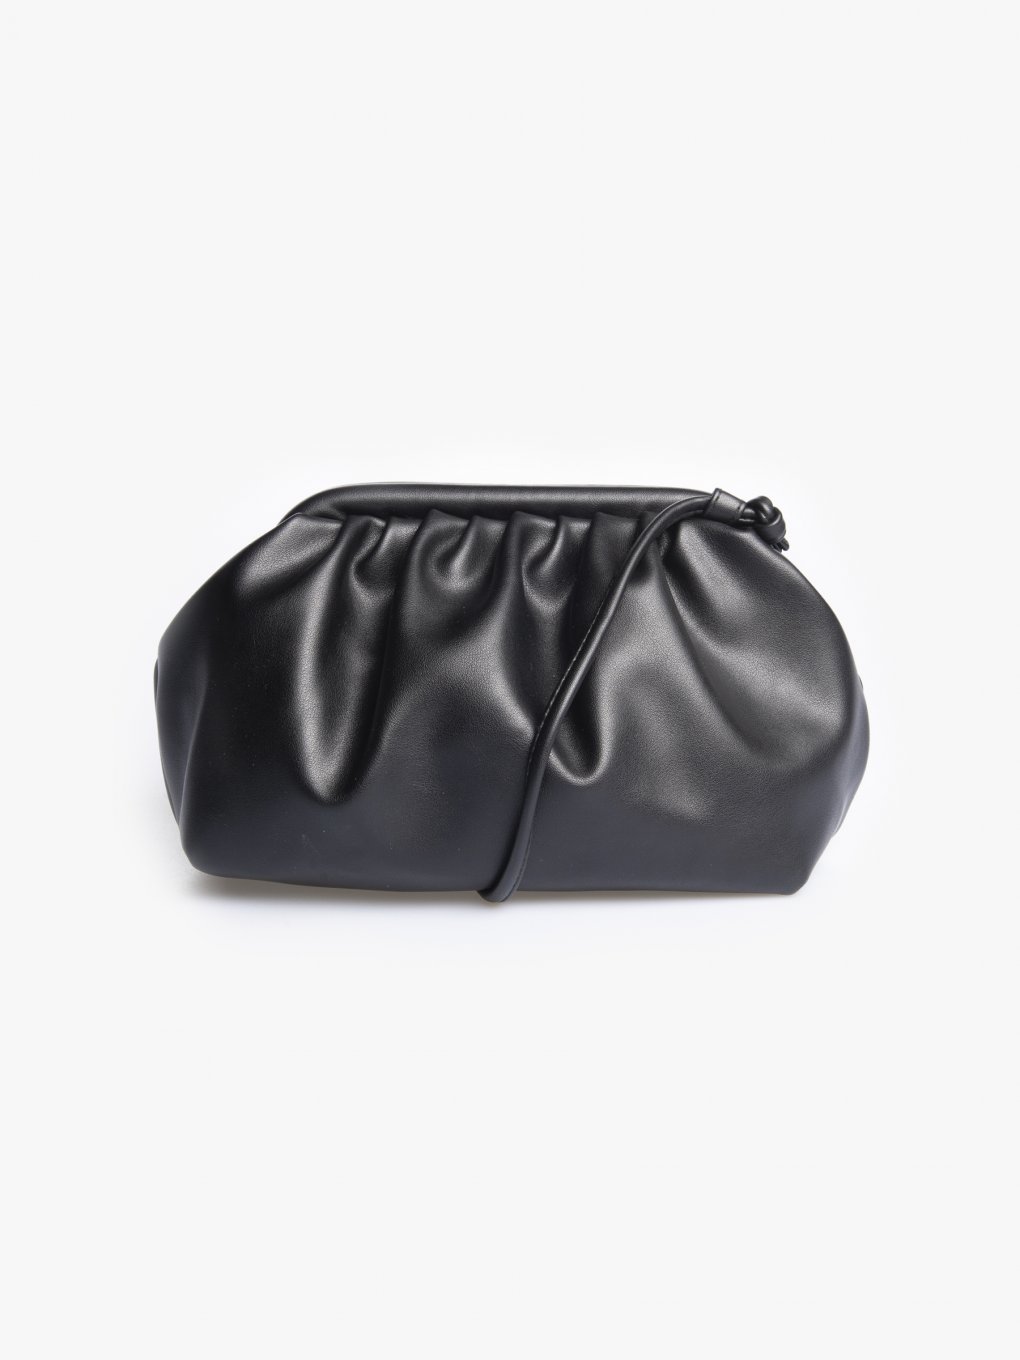 Vegan leather pouch bag